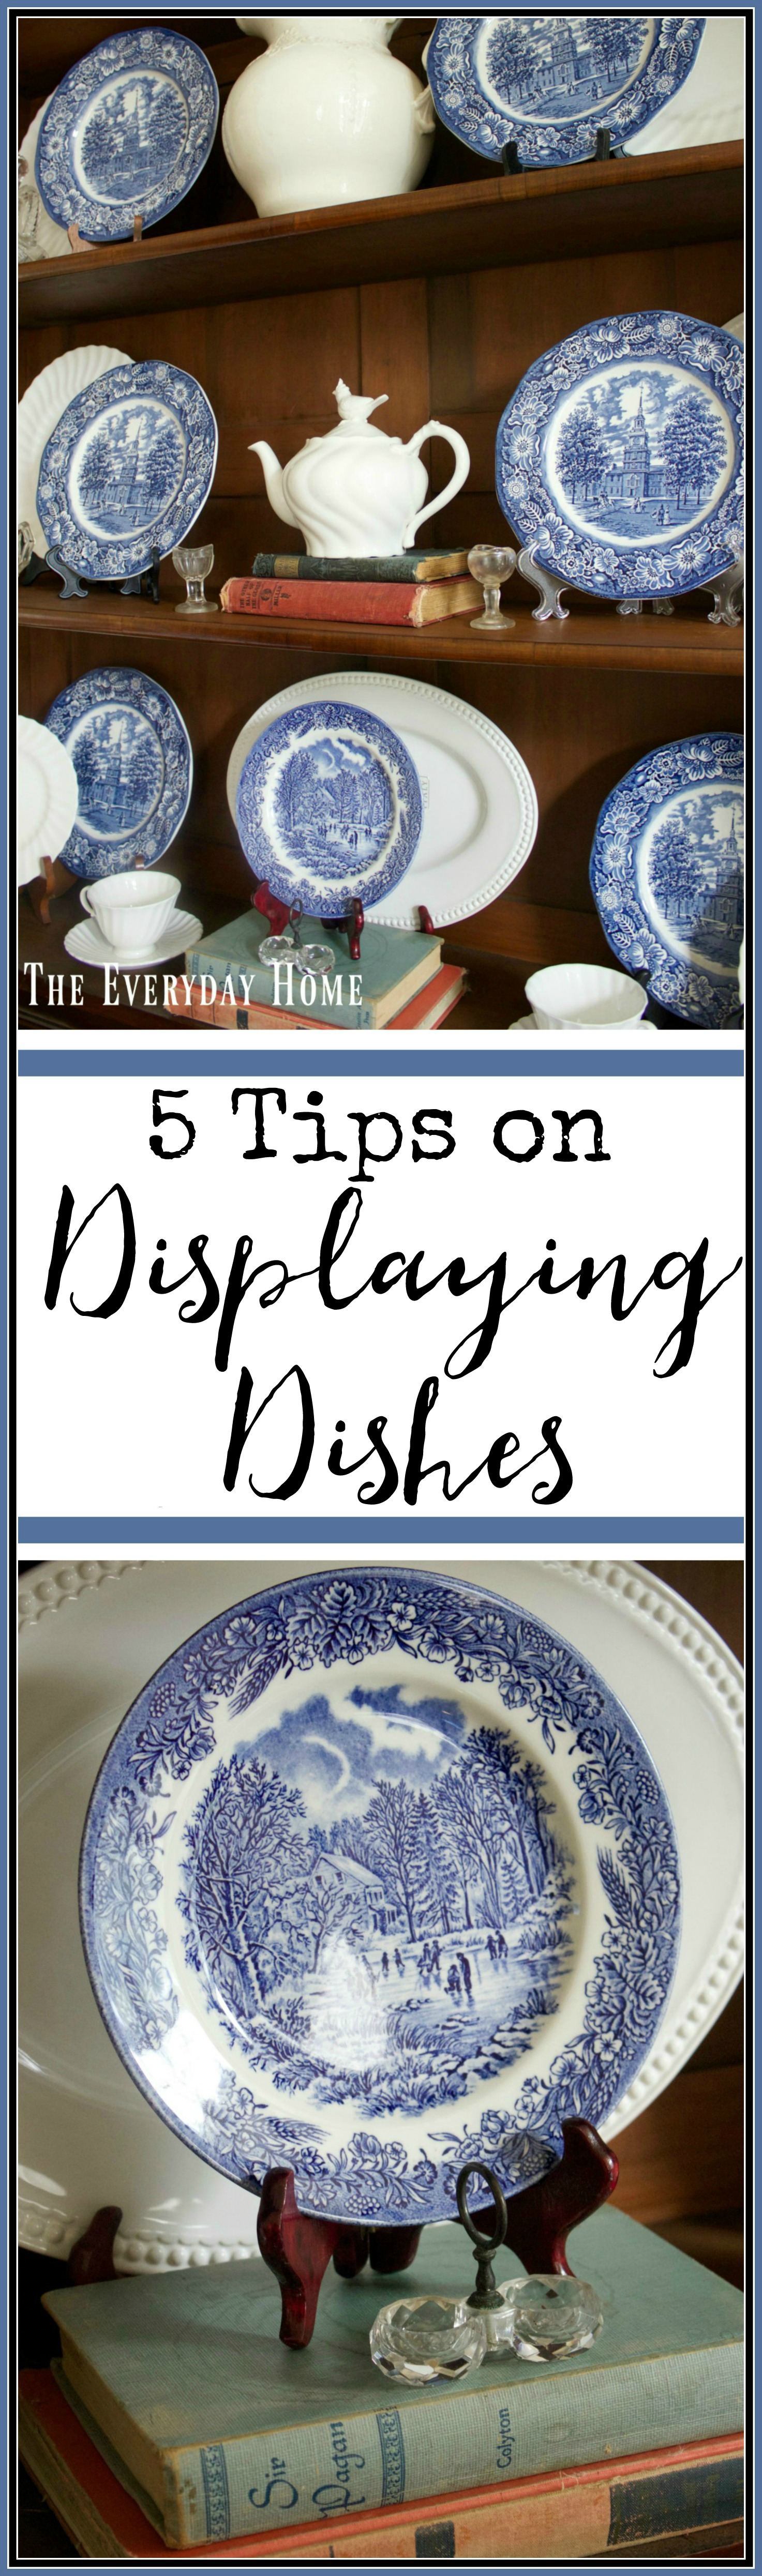 5-tips-on-how-to-style-dishes | The Everyday Home | www.everydayhomeblog.com